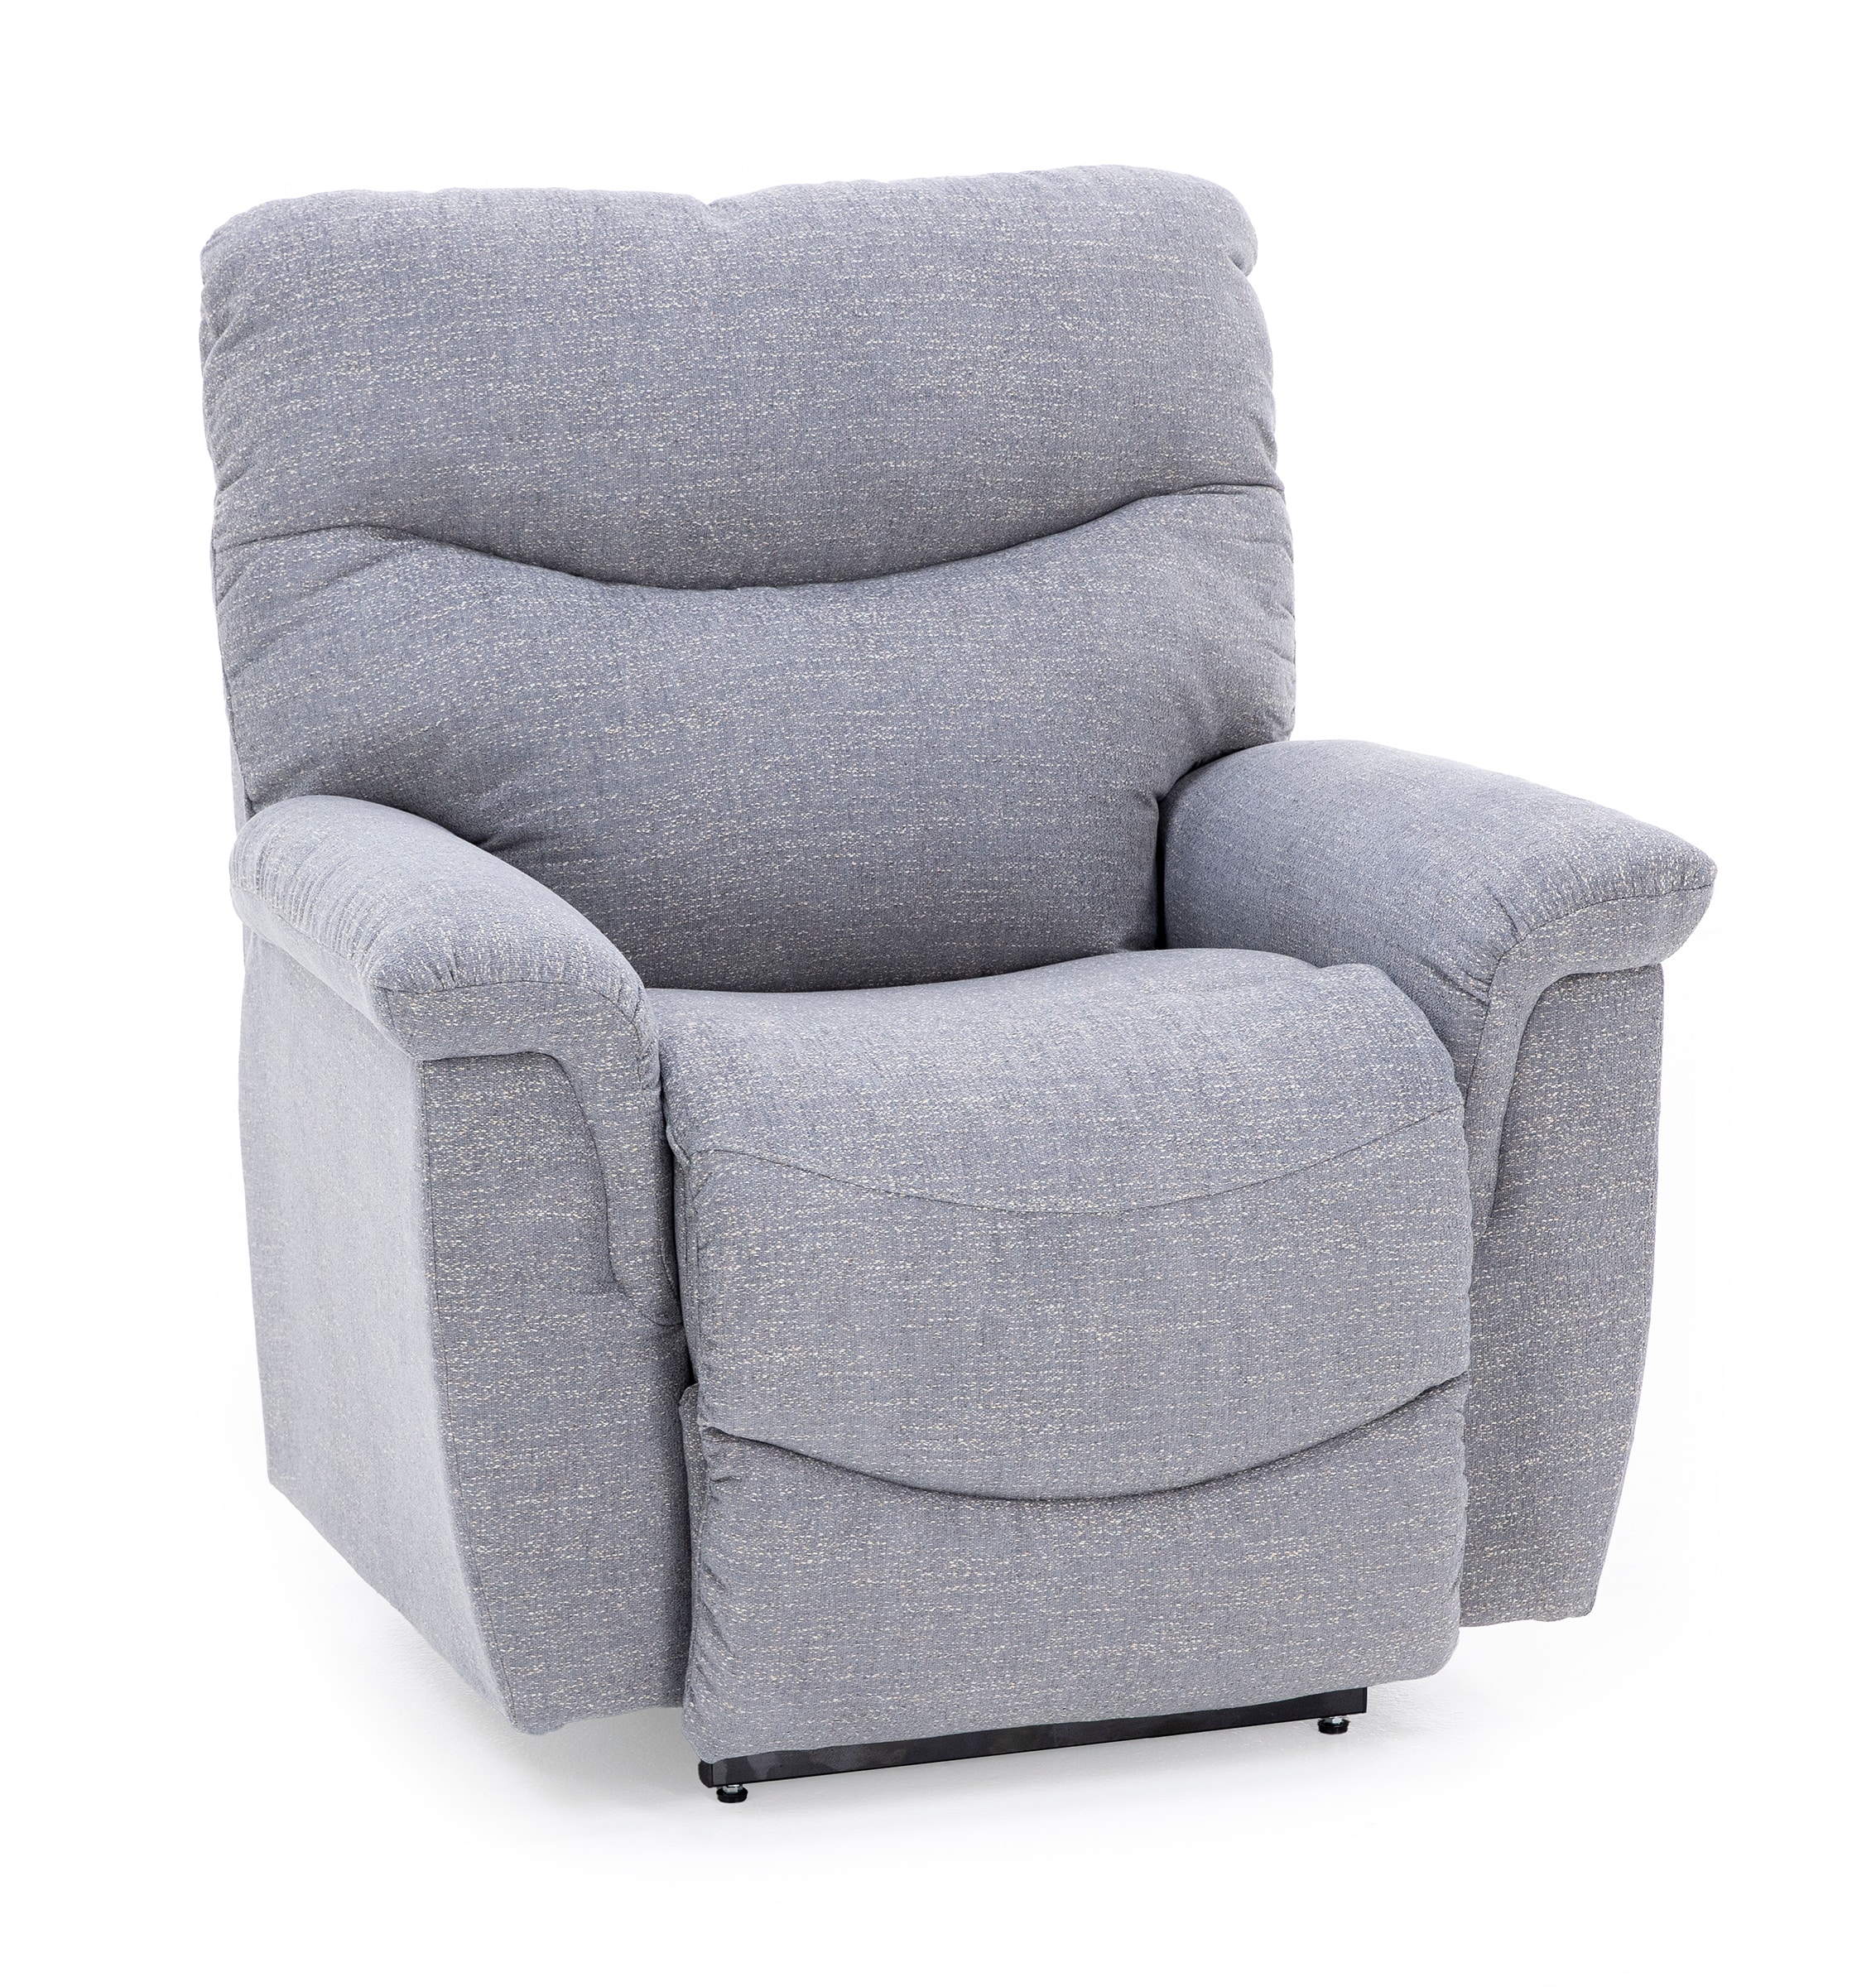 James Power Lift Chair in Restore Fabric by Nanobionic